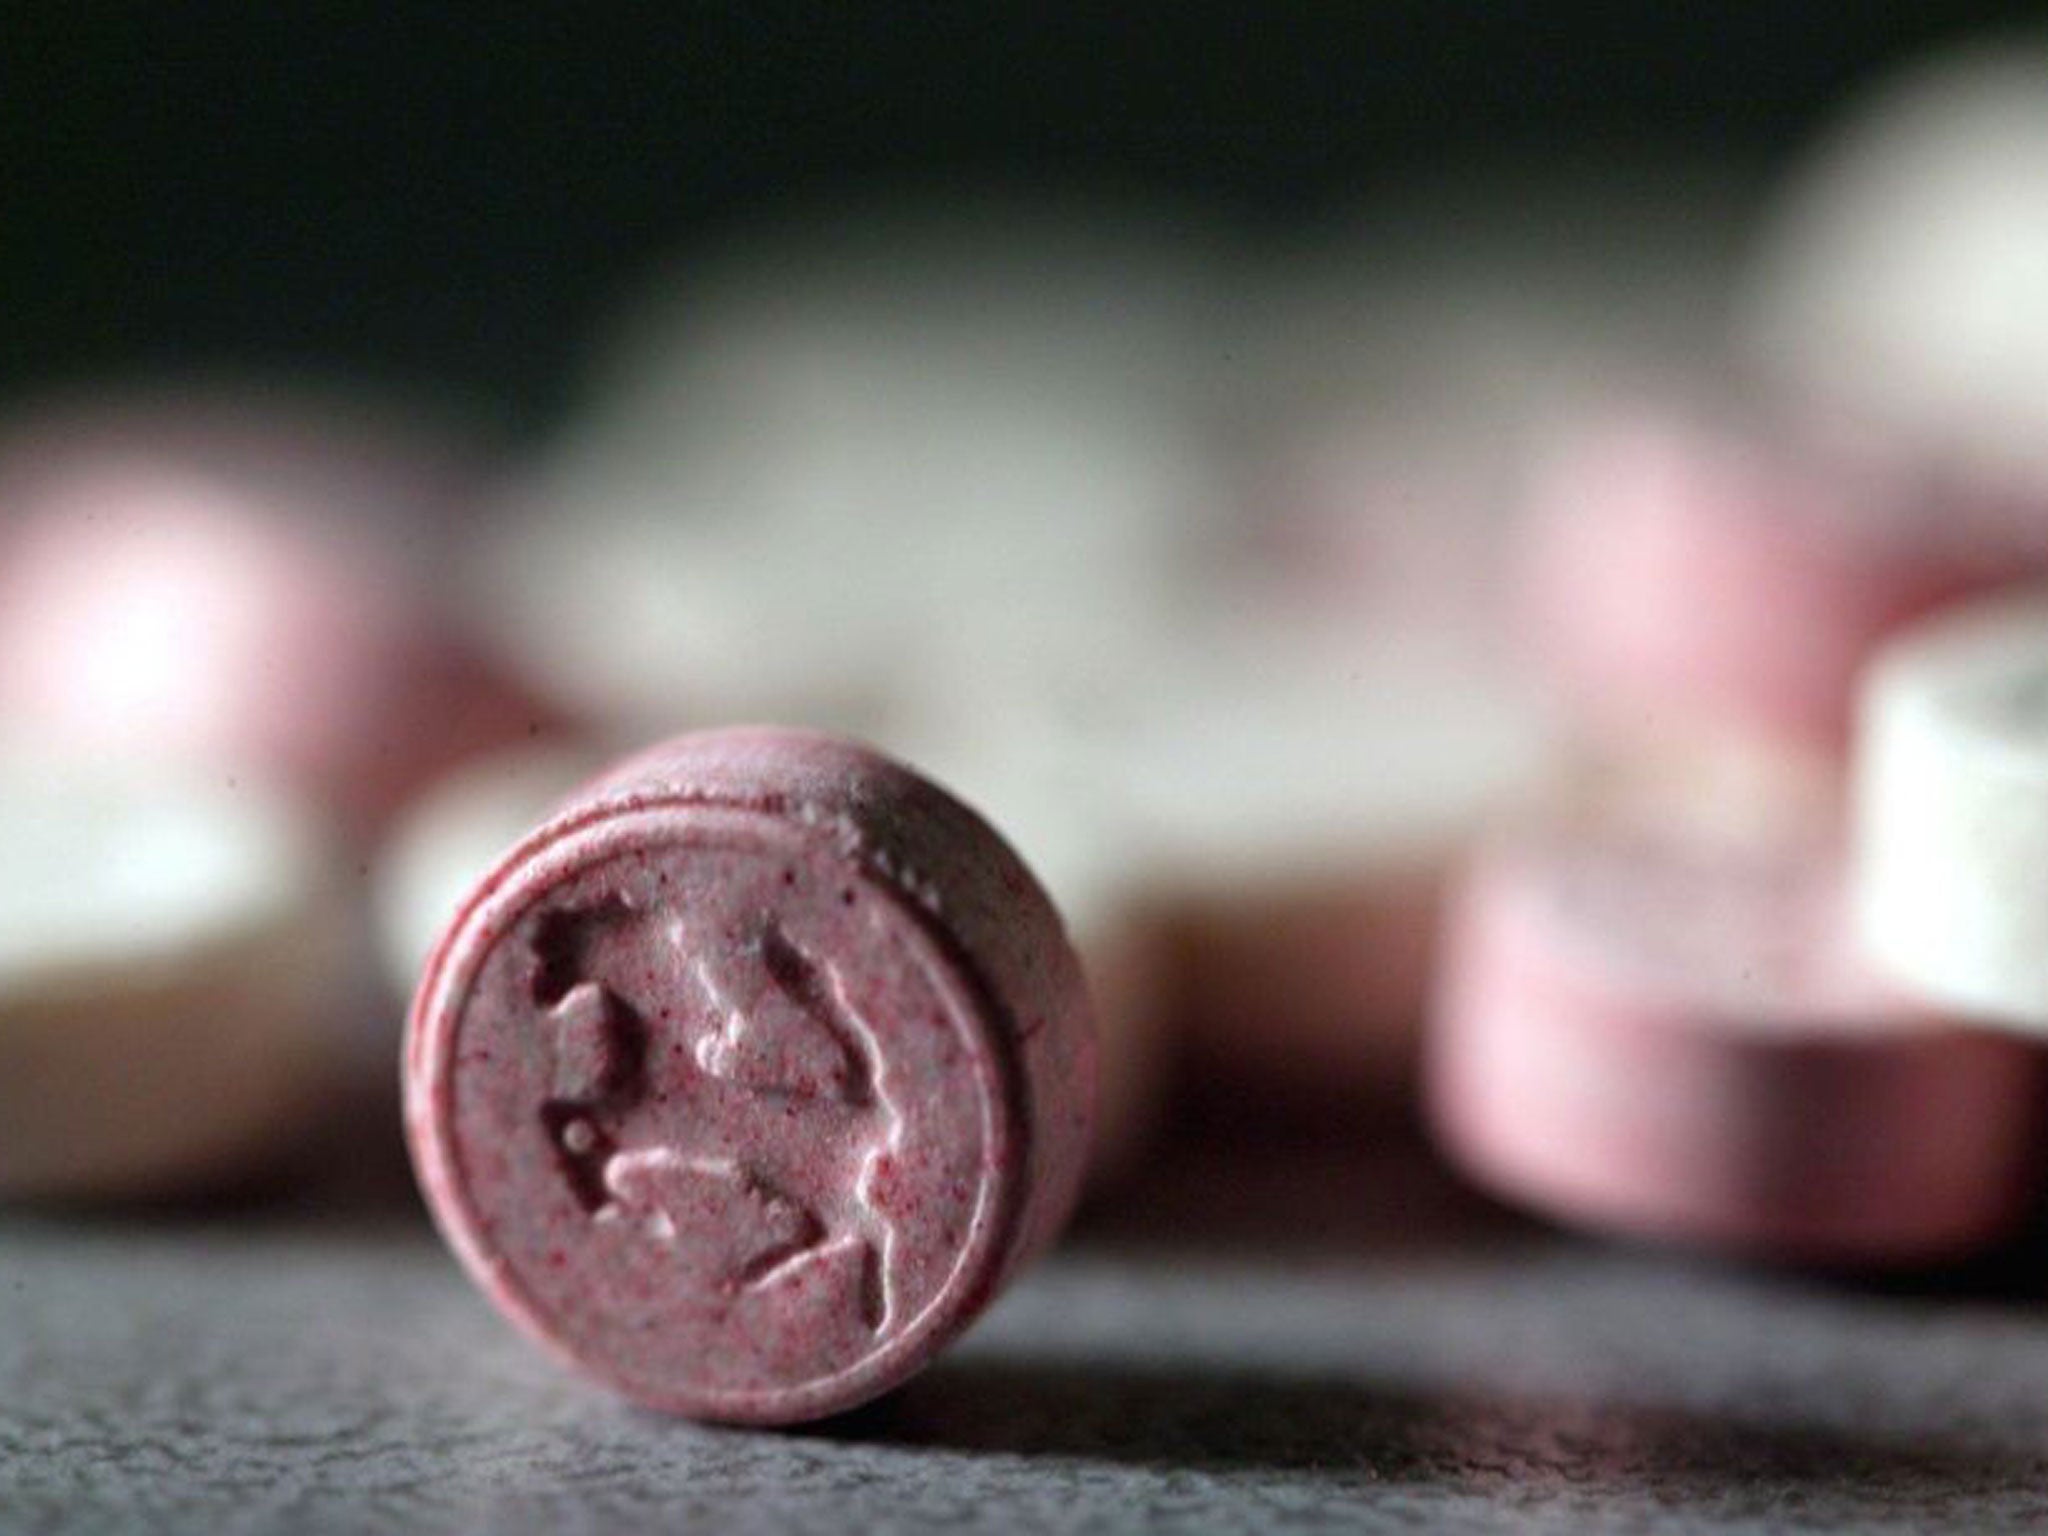 Some say that it's safer to legalise drugs like ecstasy